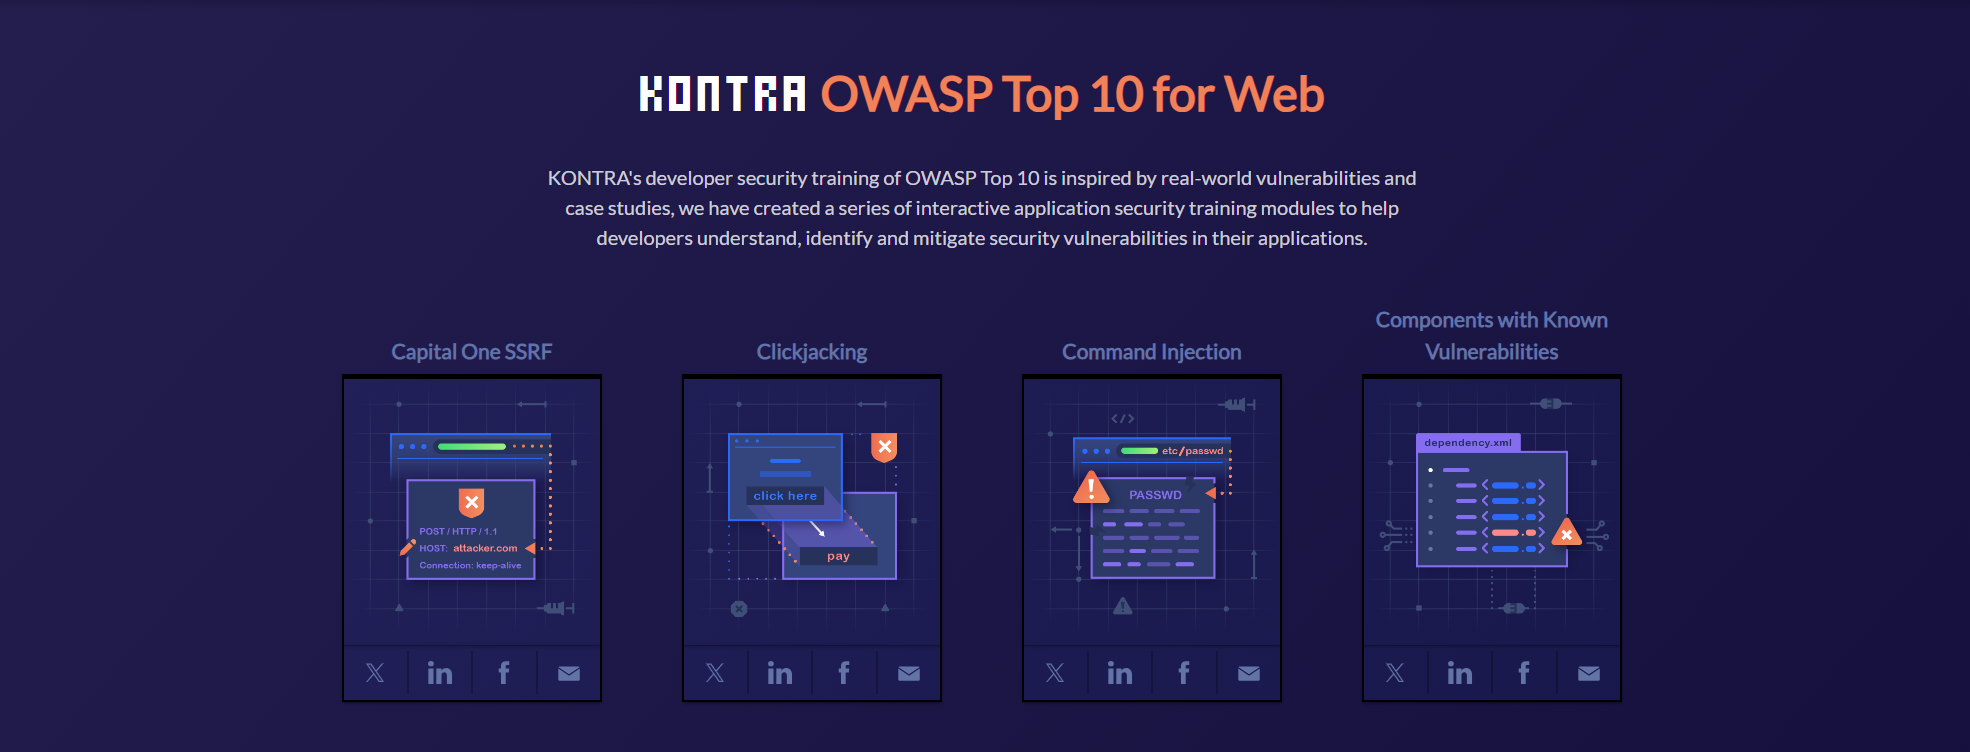 Learn how to defend against OWASP Top 10 vulnerabilities.